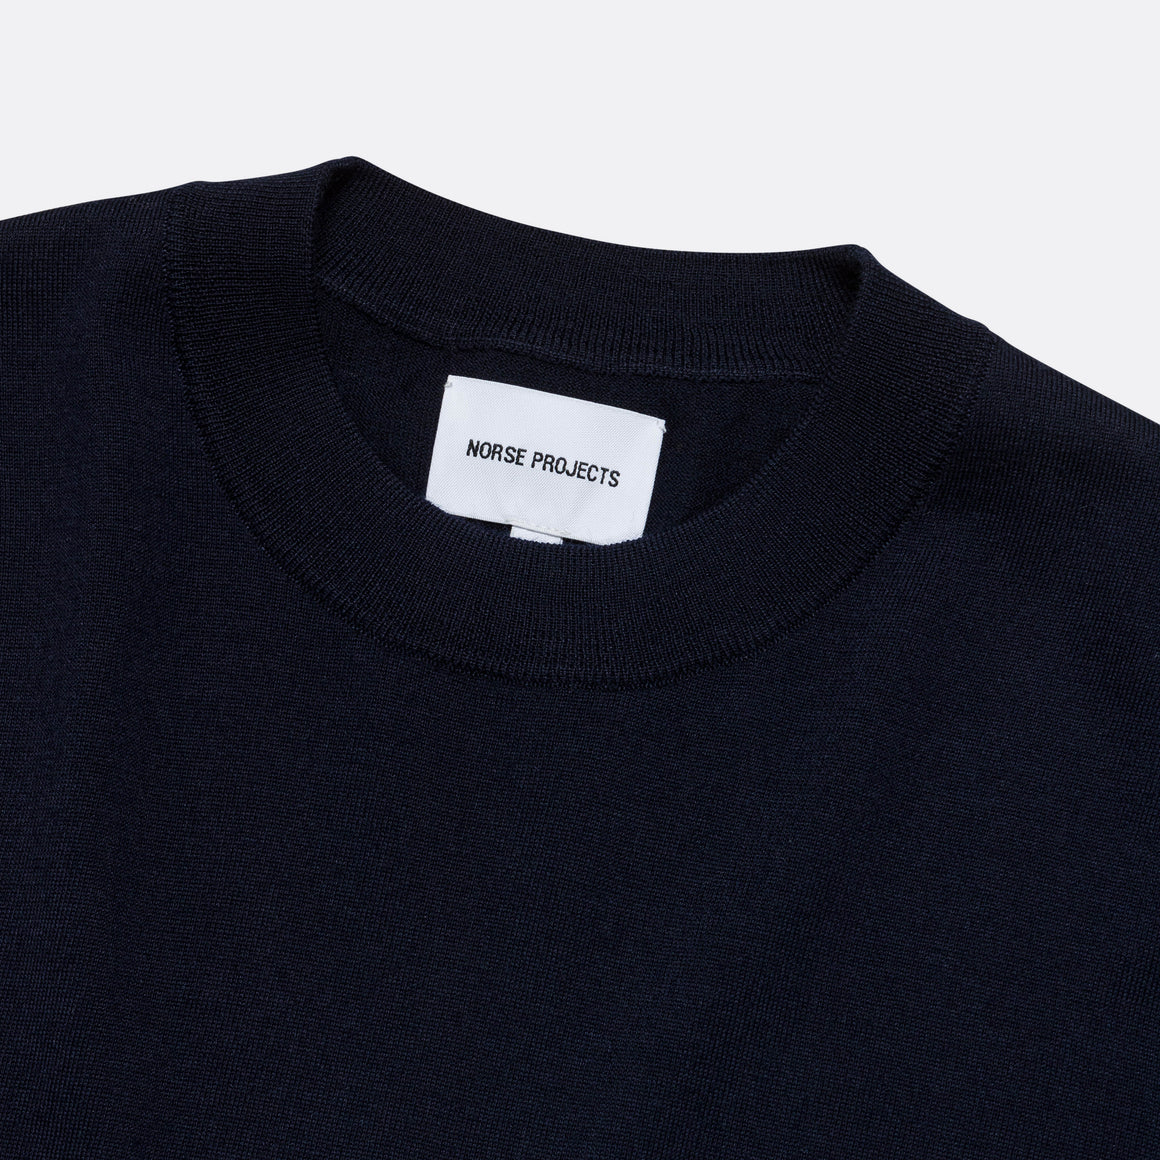 Norse Projects - Teis Tech Merino Sweater - Dark Navy - UP THERE